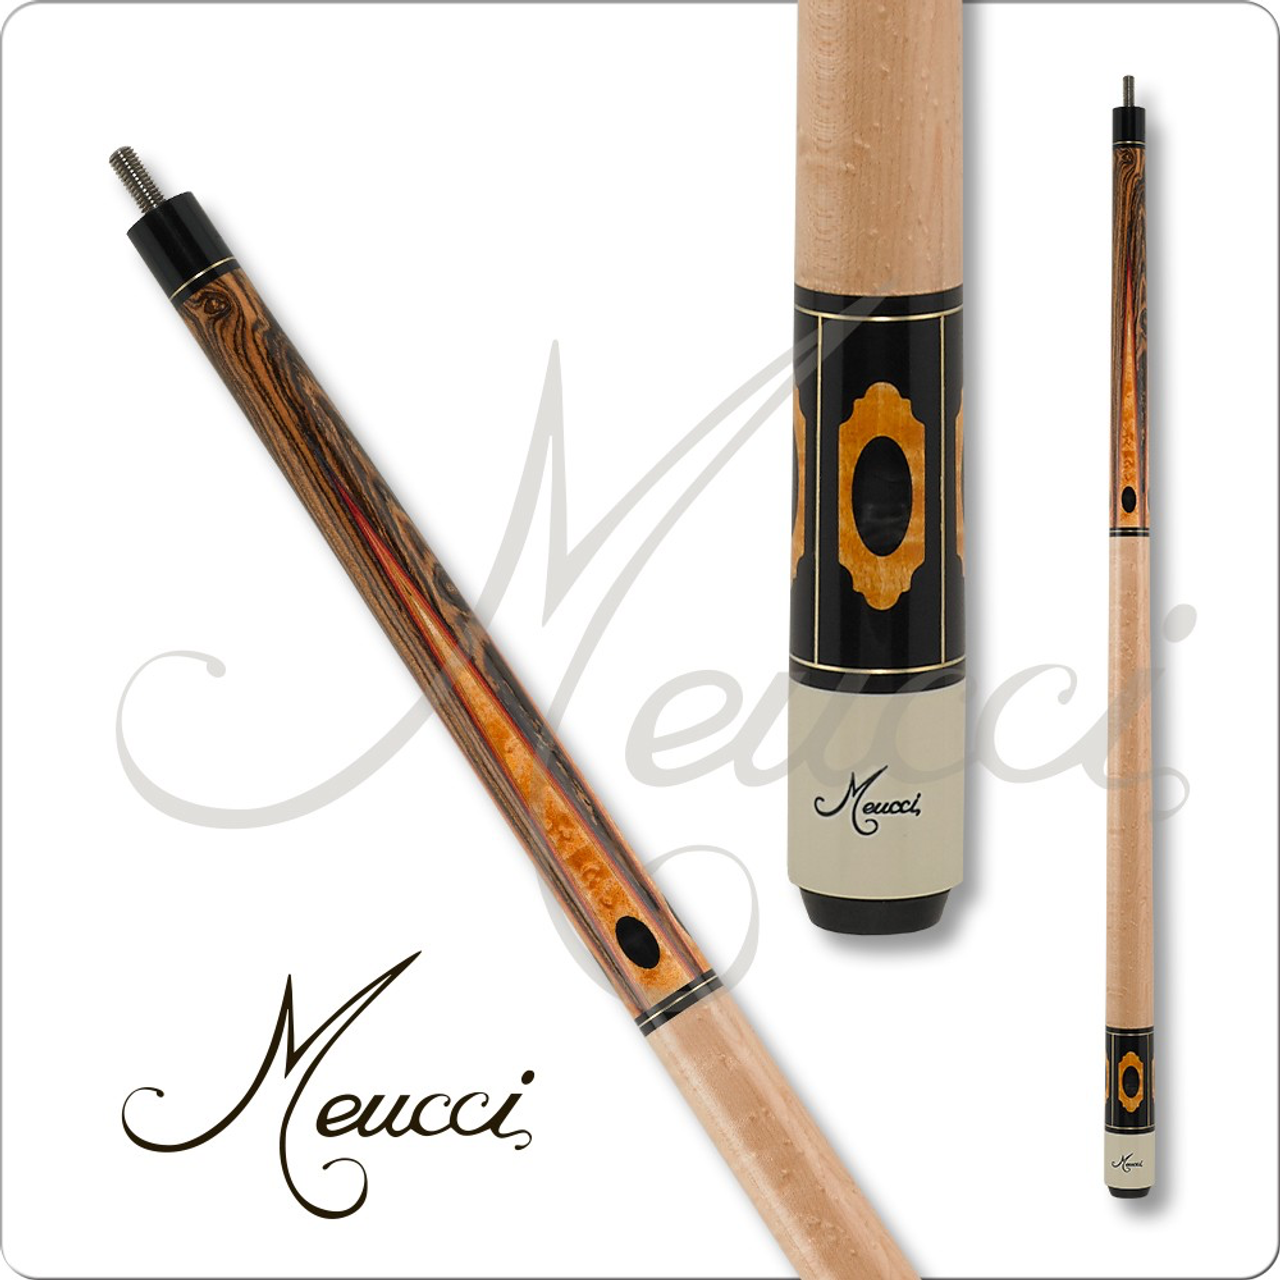 Meucci All Natural Wood ANW02 Pool Cue, Free Shipping